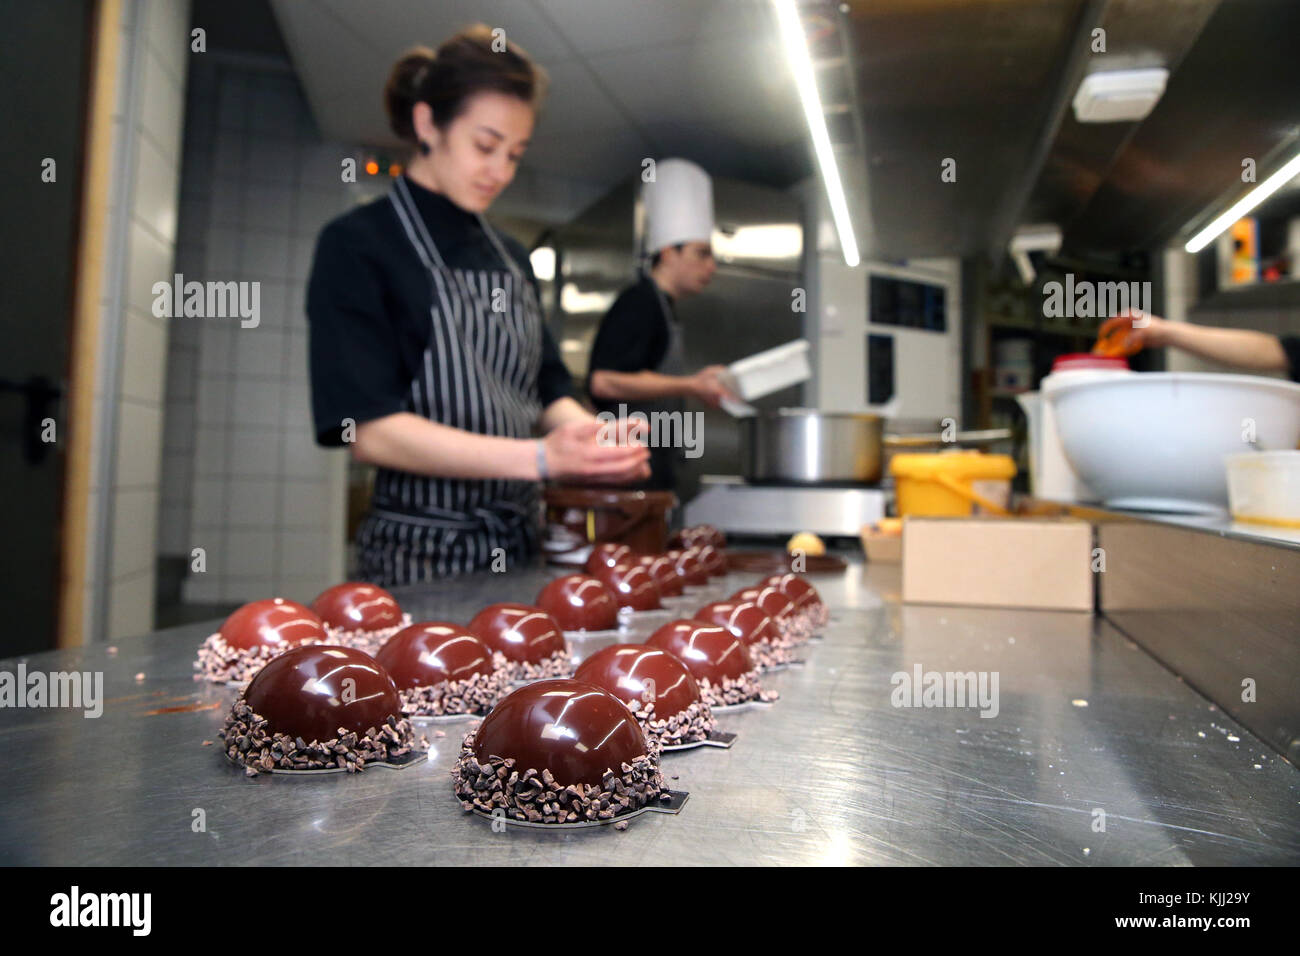 Bakery.  Chocolate cake  dessert being prepared in kitchen.  France. Stock Photo